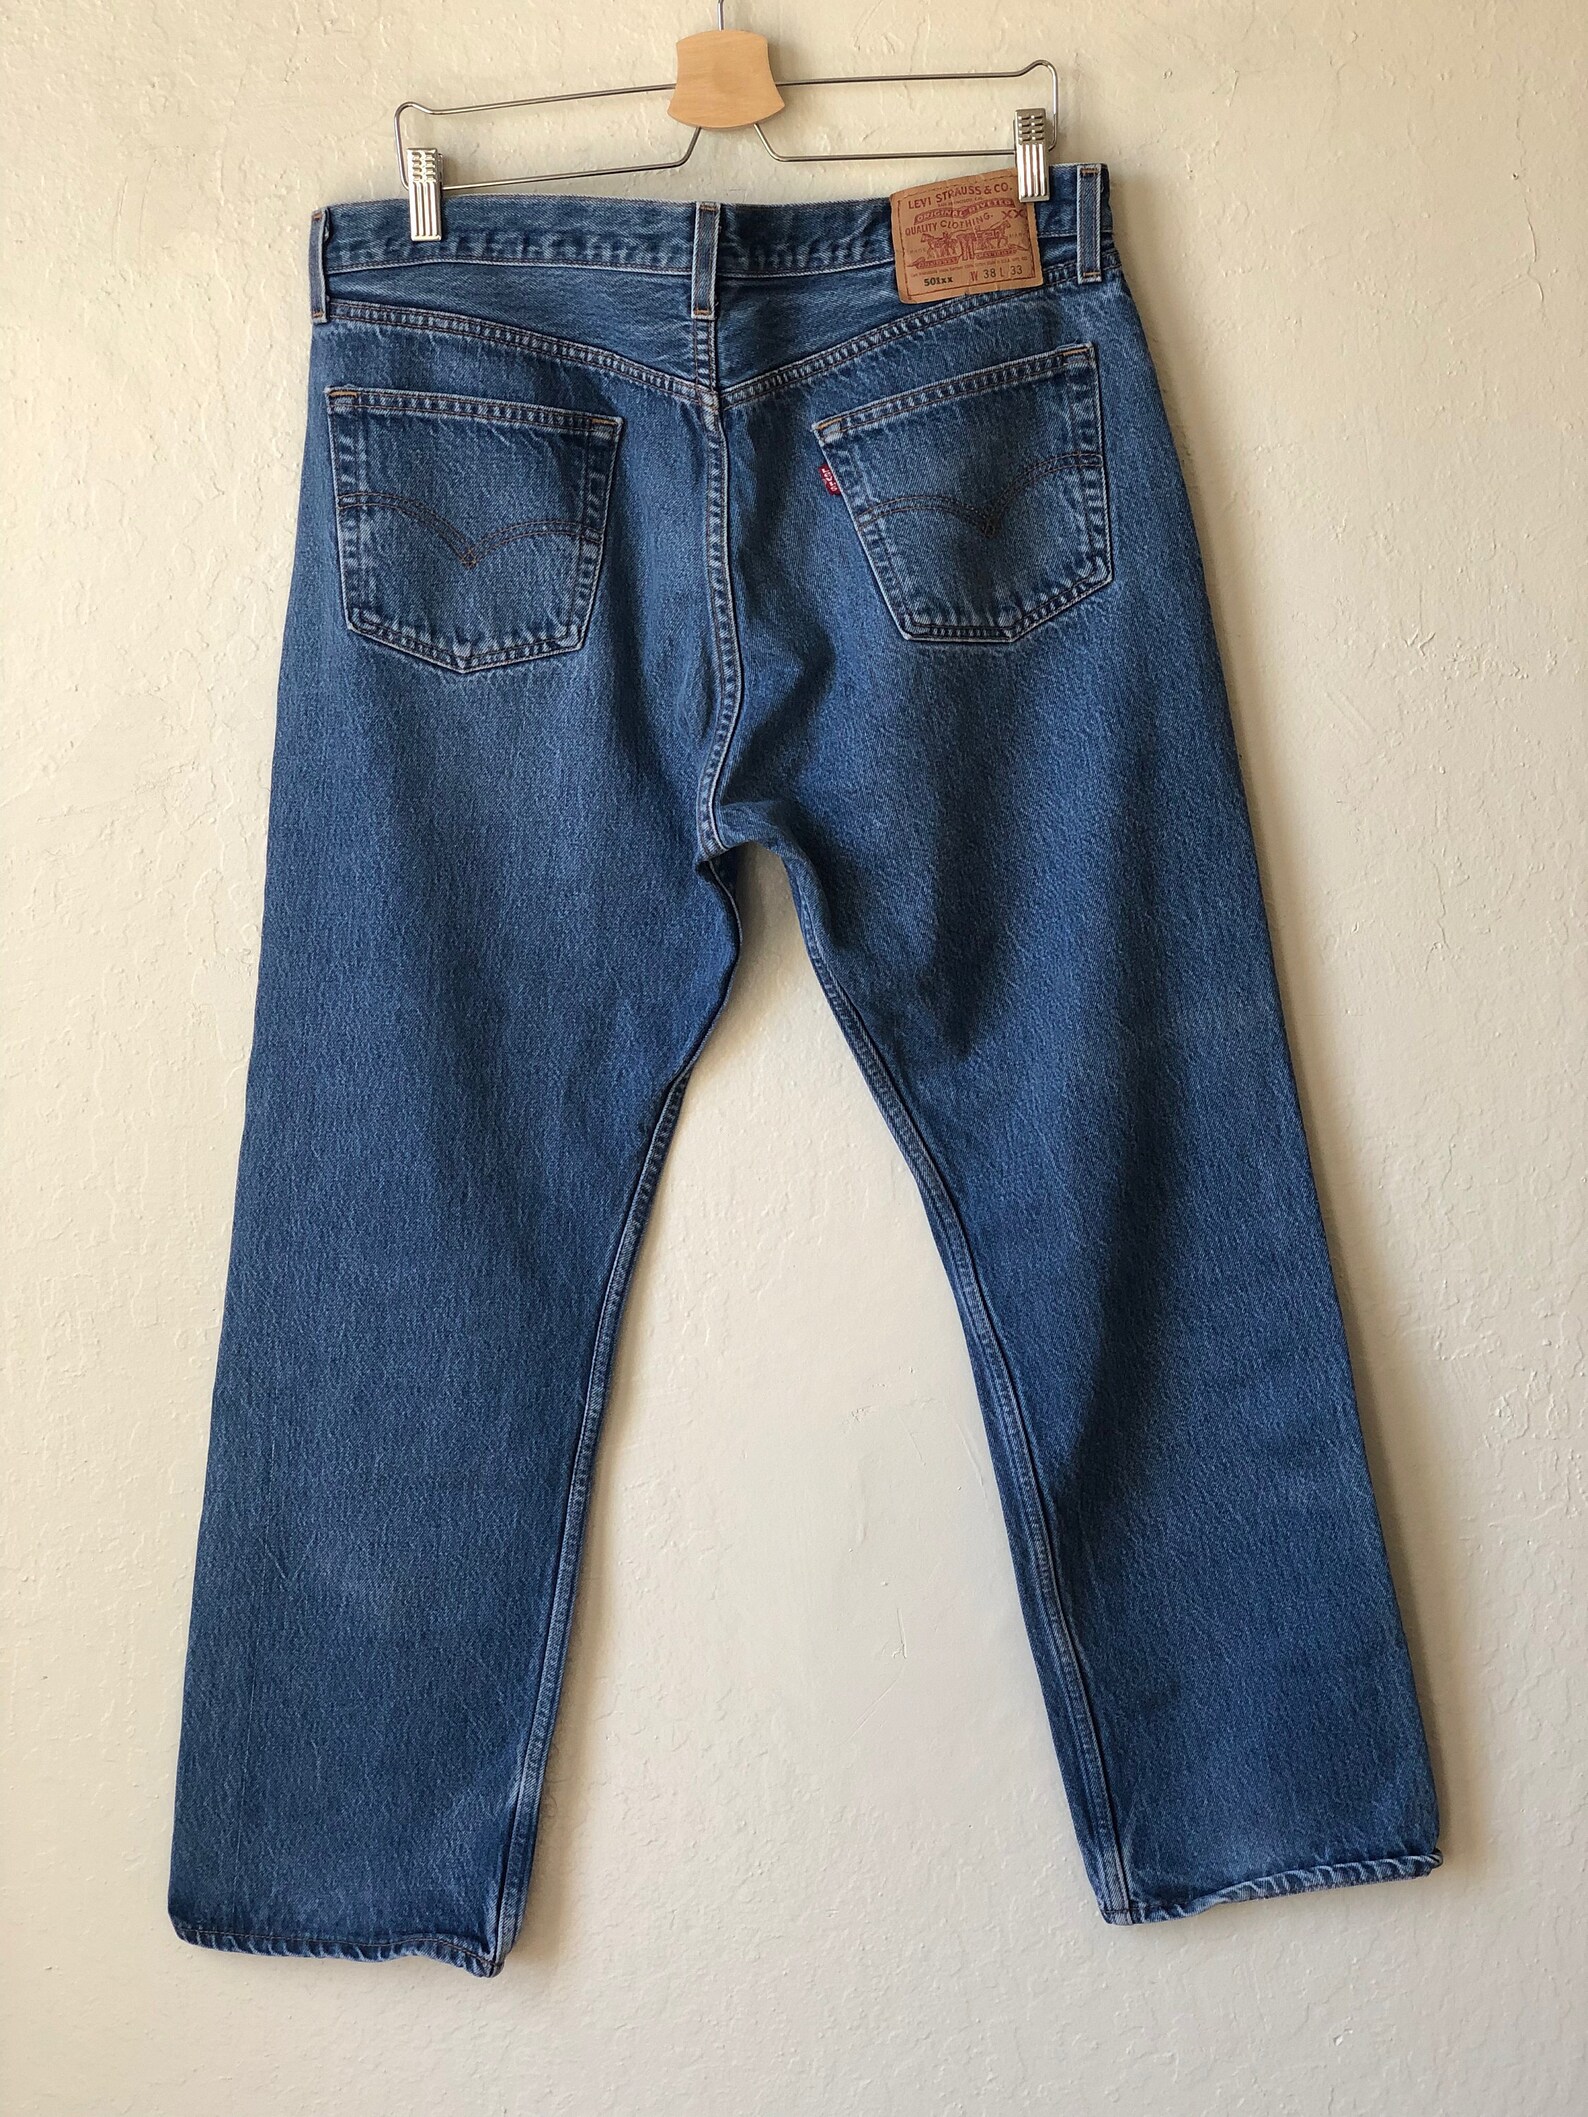 Levis 501 XX Shrink-to-fit Vintage Made in USA Denim Jeans | Etsy